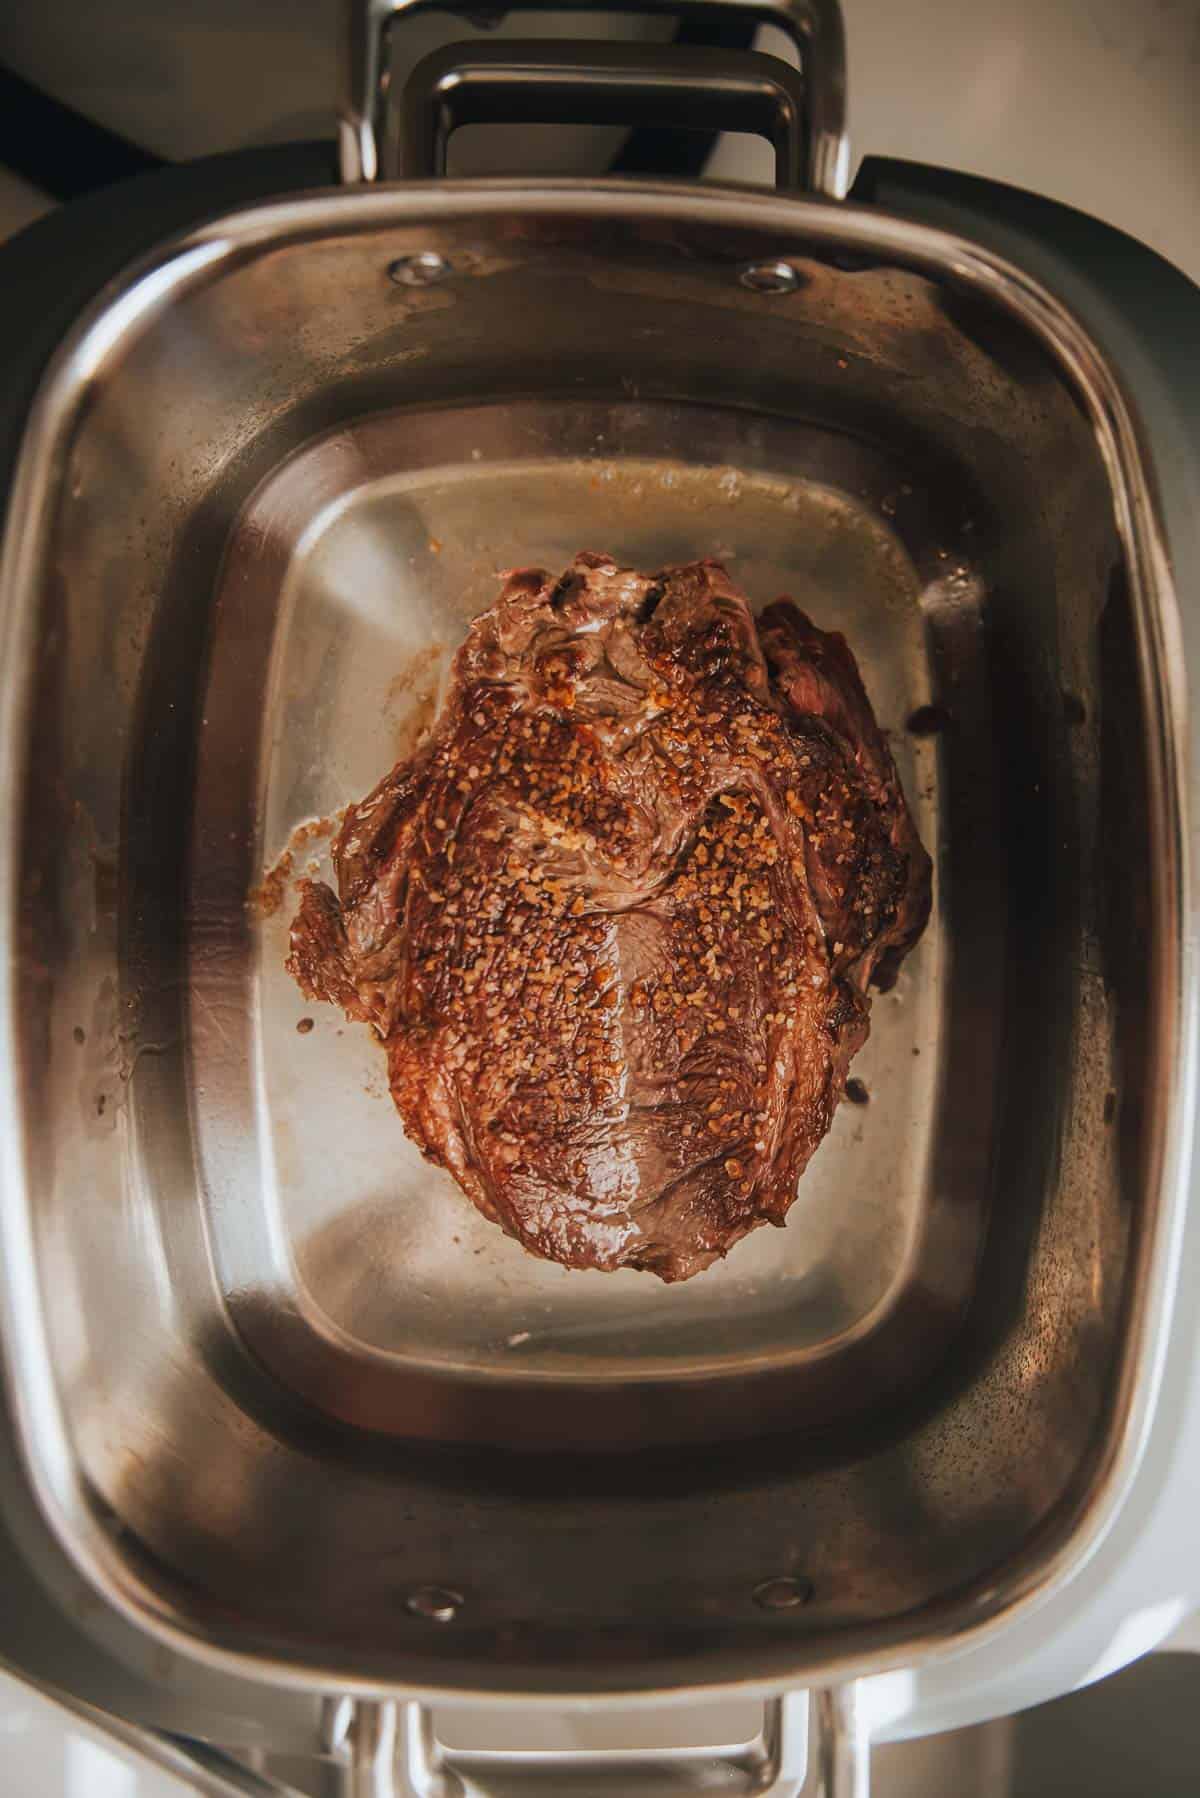 A chuck roast being browned in a slow cooker.